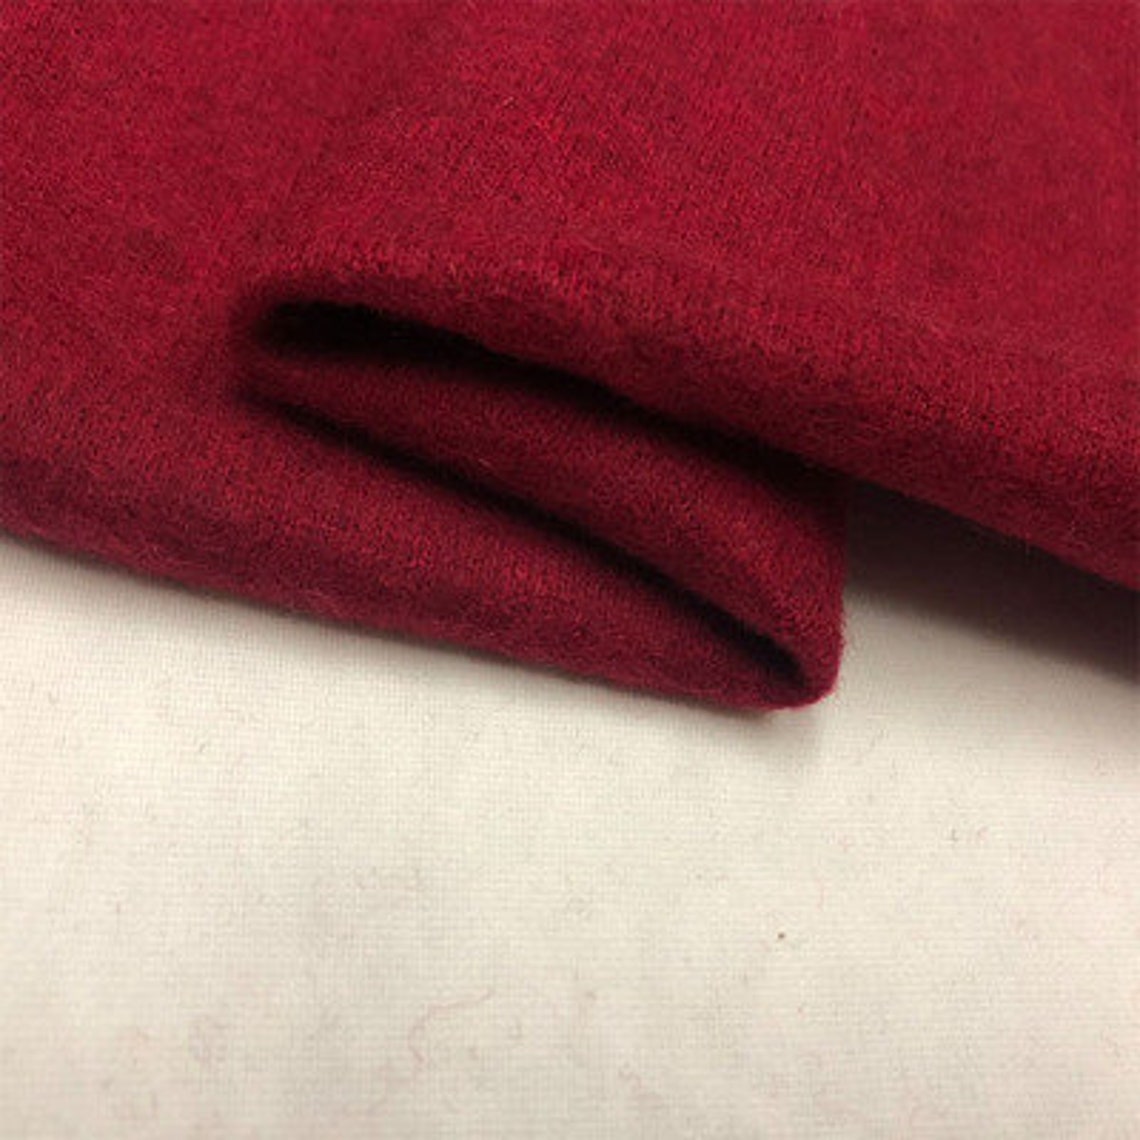 Bright Red/green/red Knit Cashmere Wool Fabric Japanese - Etsy